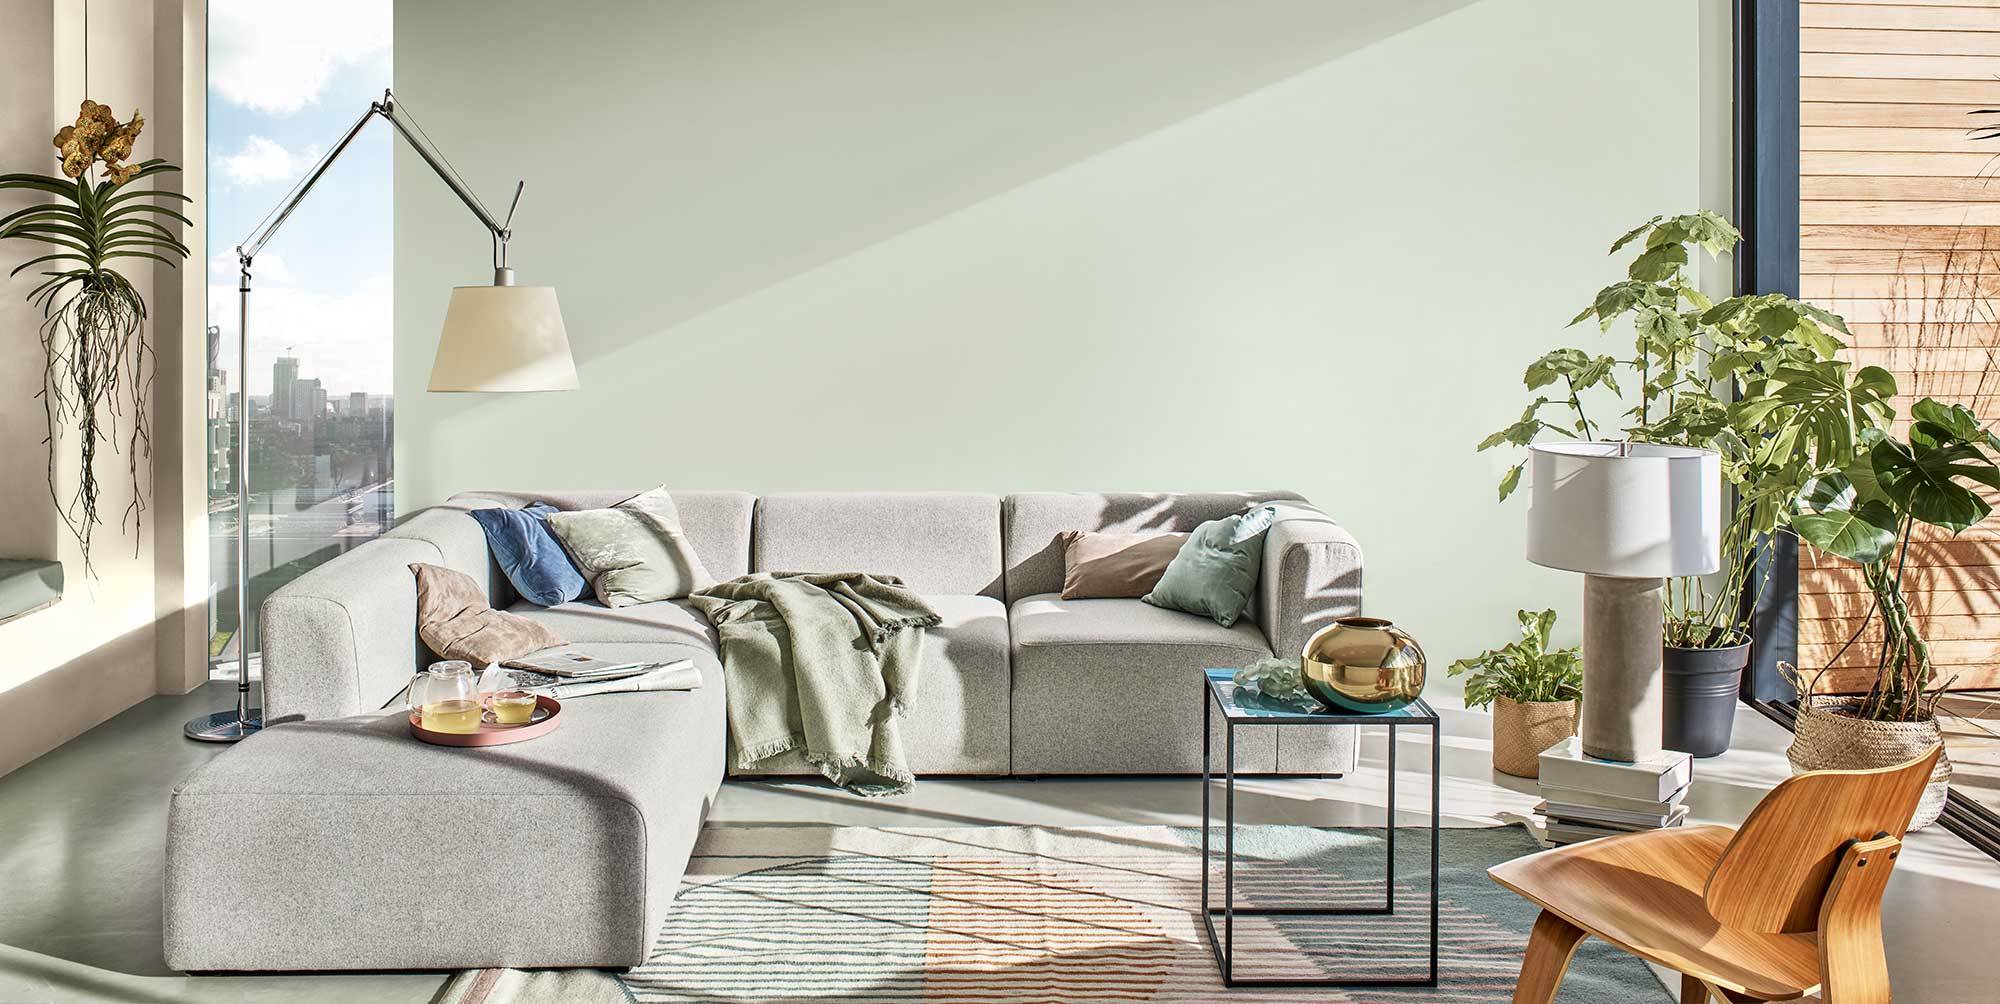 Bruguer_Colour-of-the-Year-2020. Dulux-Colour-Futures-Colour-of-the-Year-2020-A-home-for-care-Livingroom-Inspiration-Global-1